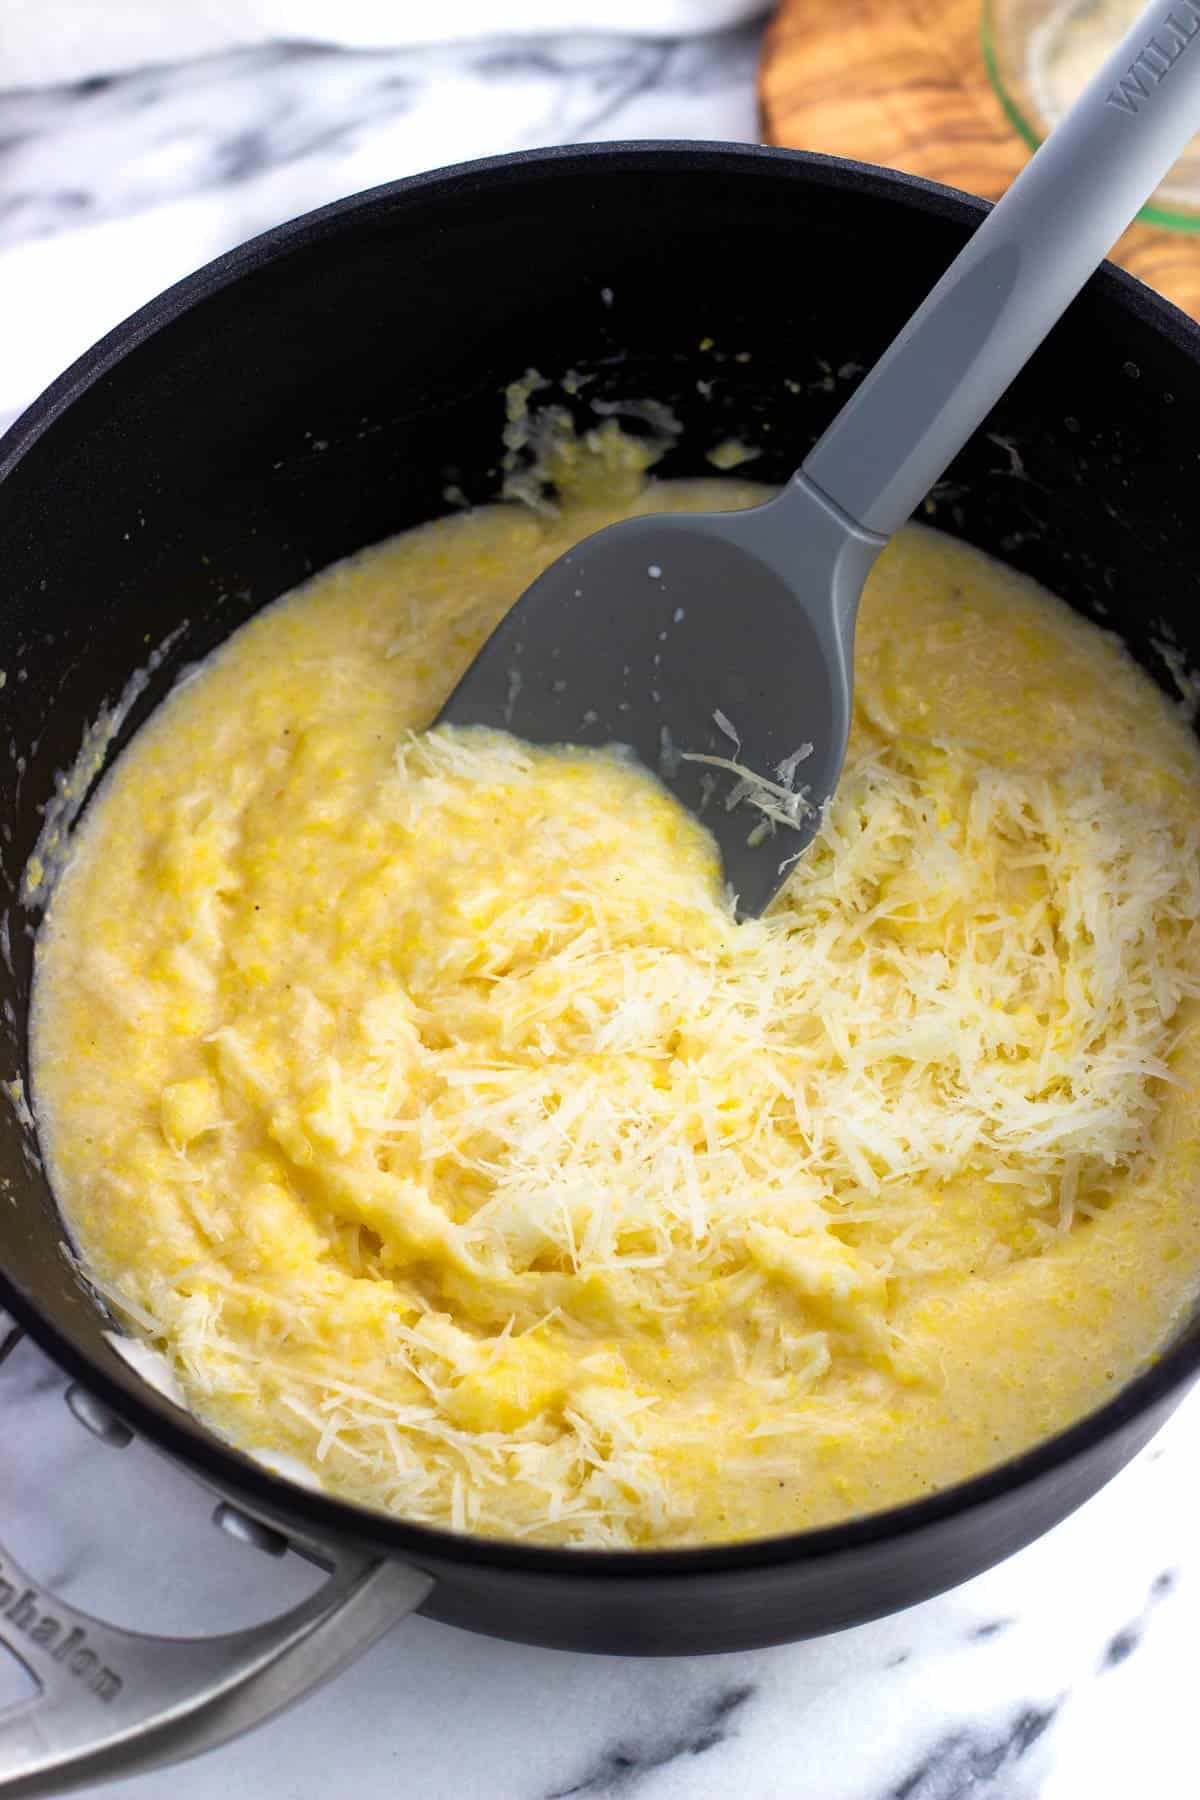 Grated Parmesan being stirred into the pot of polenta.